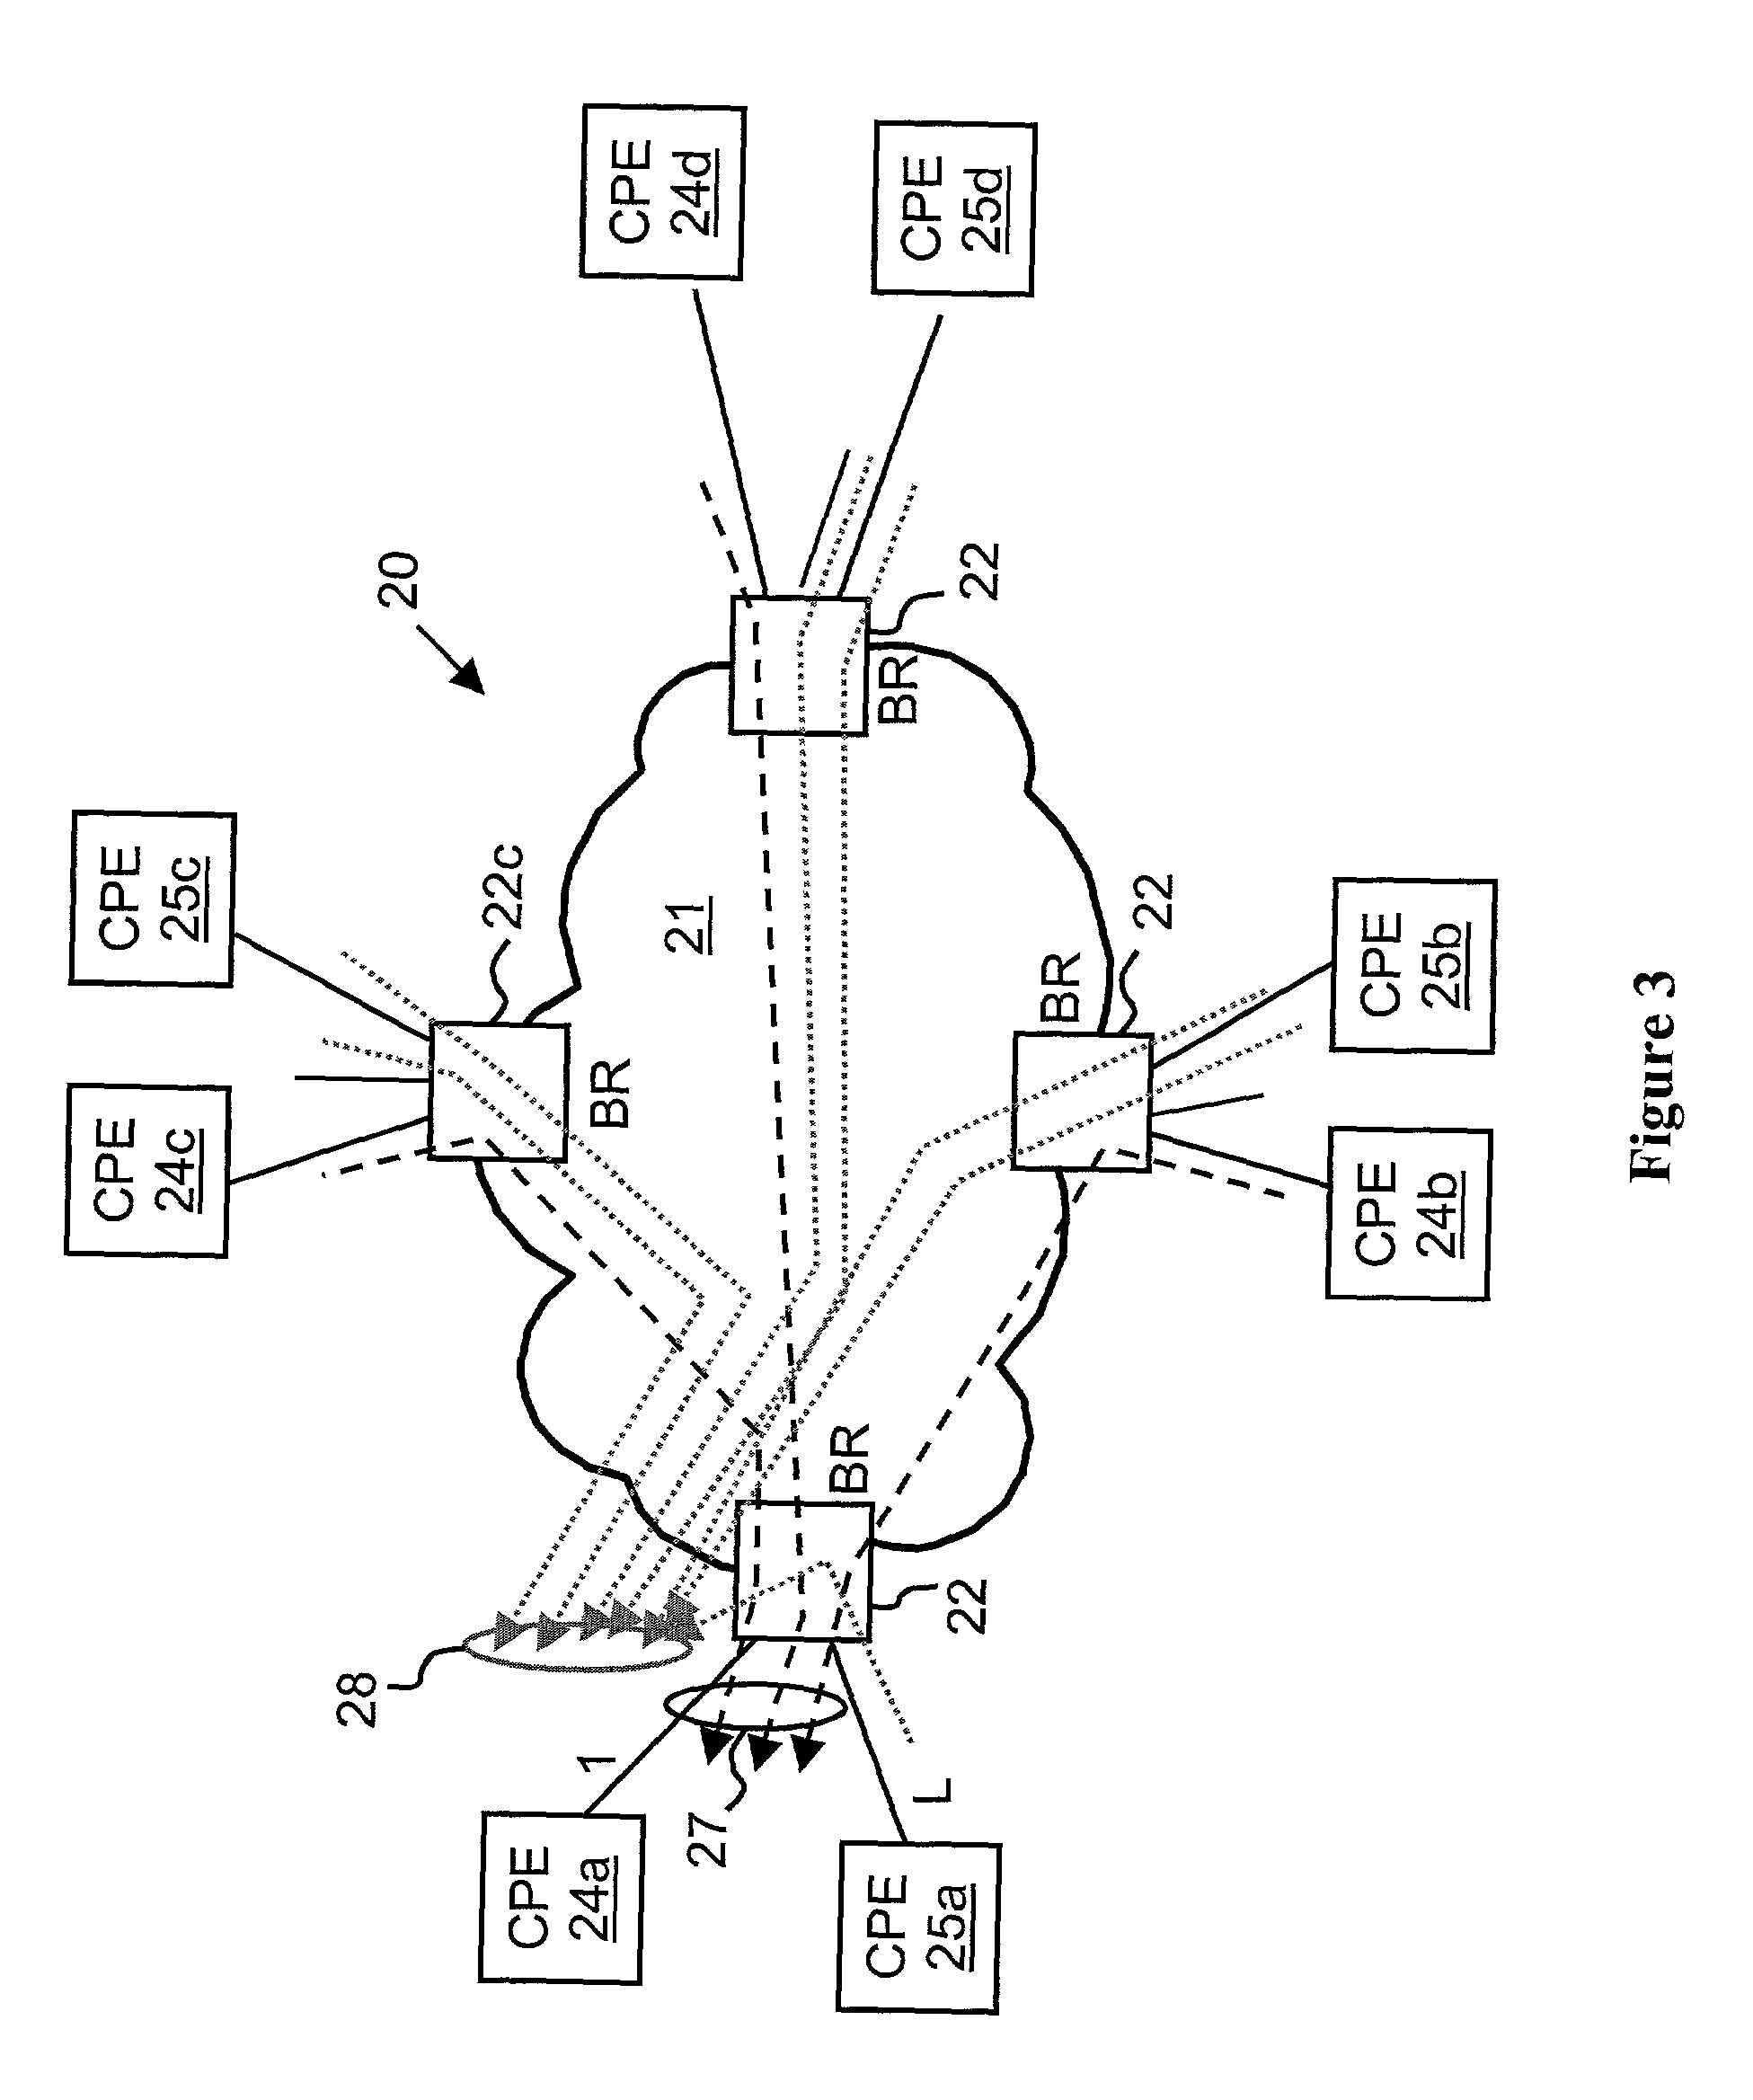 System, method and apparatus that employ virtual private networks to resist IP QoS denial of service attacks